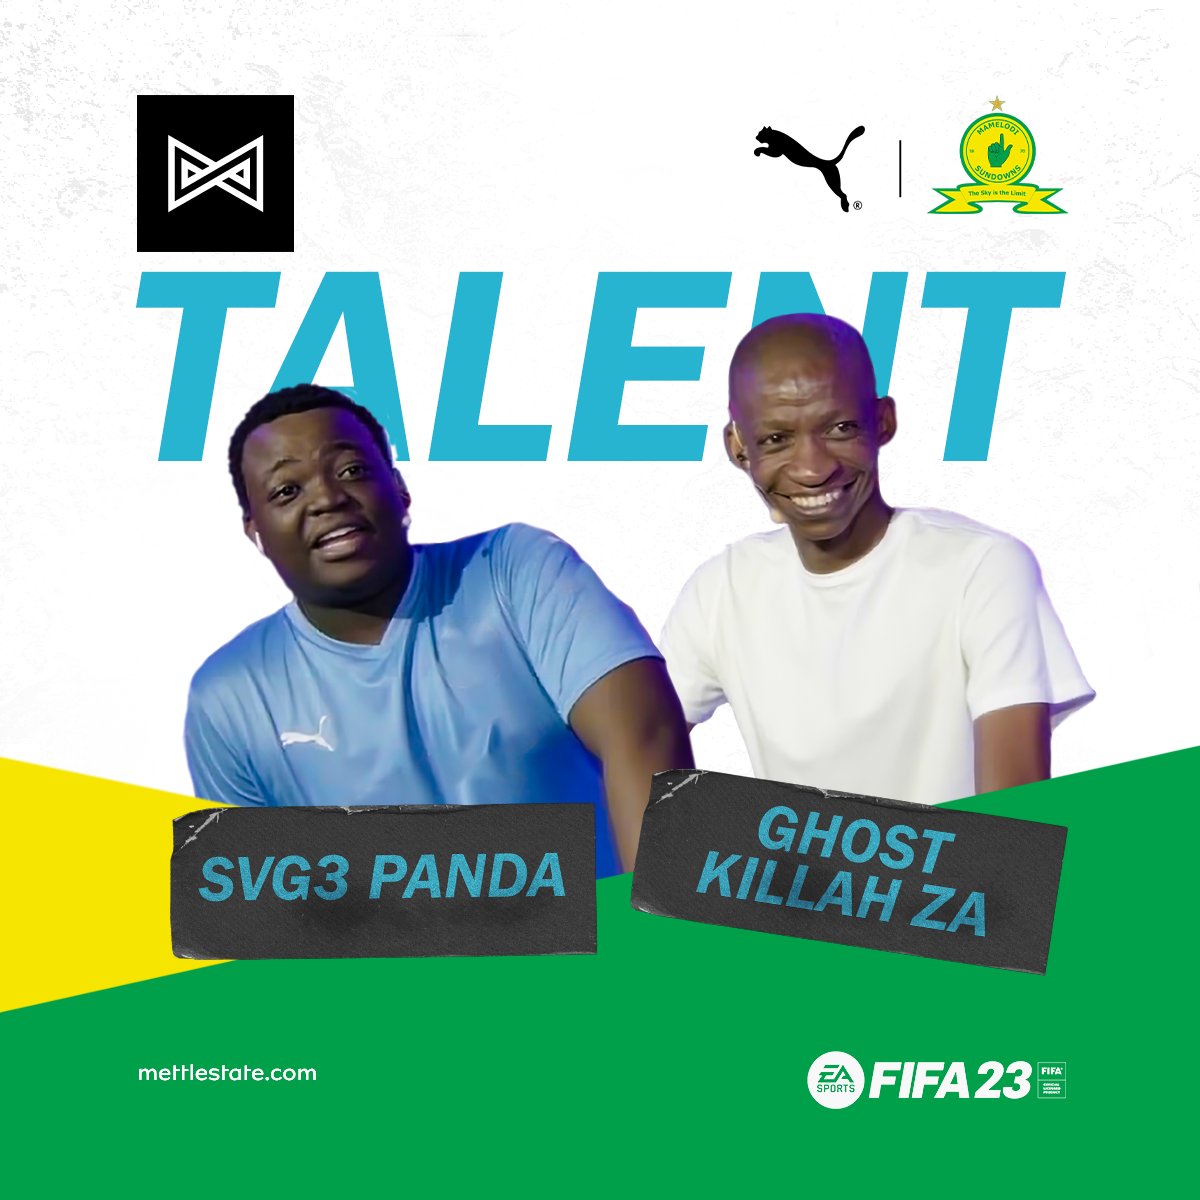 The time has come Champions! ⚽ Join us this SATURDAY over on twitch.tv/Mettlestate at 12:00SAST alongside @SvG3PanDa & Ghost Killah ZA for all the nail-biting action of the Mamelodi Sundowns Championship online Finals! 💻🙌 @Masandawana @SundownsLadies  #FIFA23 #Sundowns